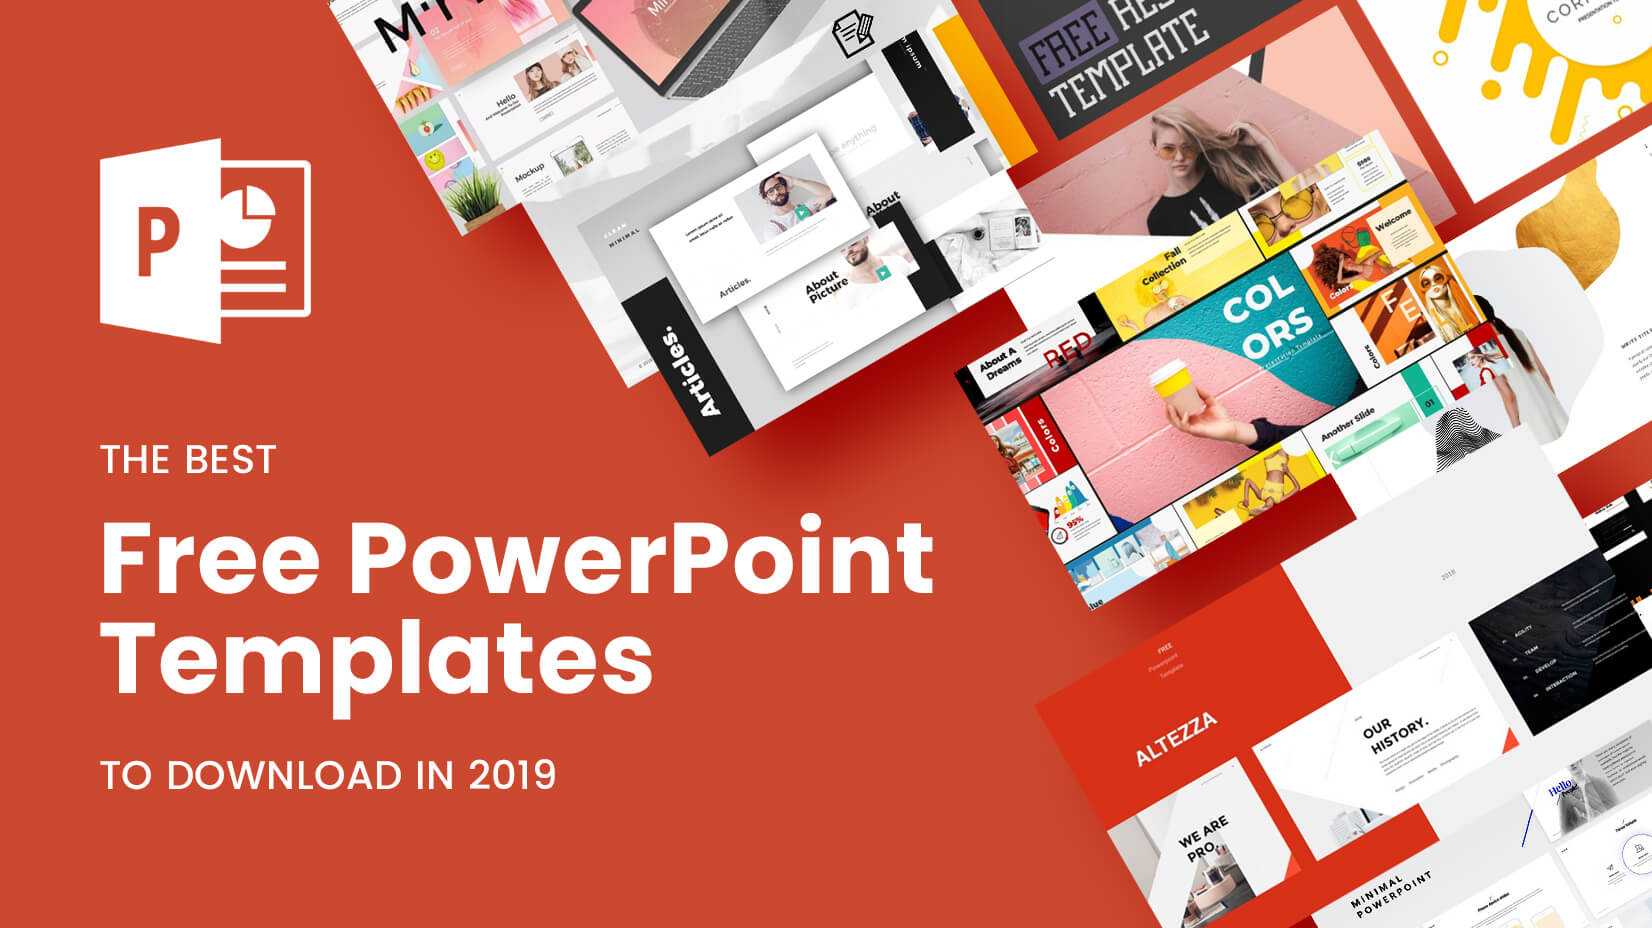 The Best Free Powerpoint Templates To Download In 2019 Regarding Powerpoint Sample Templates Free Download